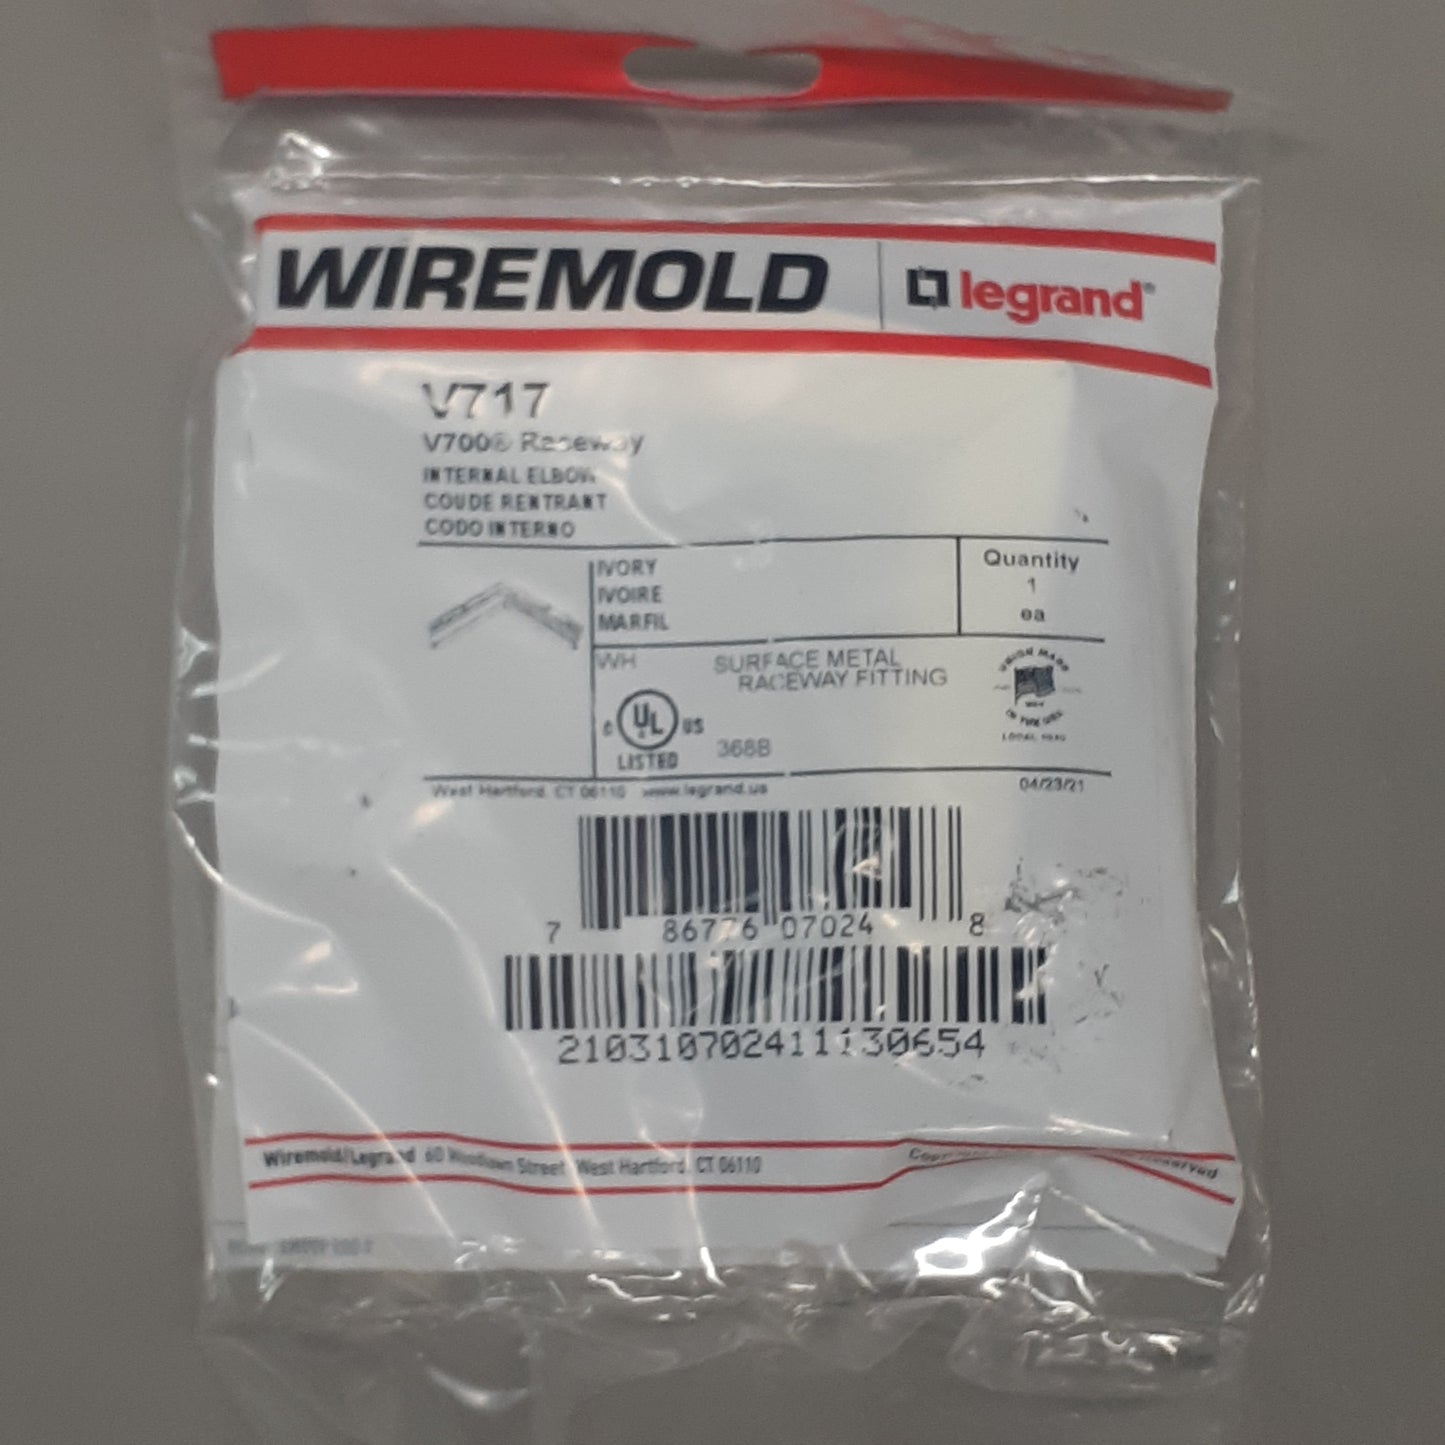 WIREMOLD 10-Pack! Internal Elbow Raceway Wire Holder 90 Degree 2-3/4 V717 (New)